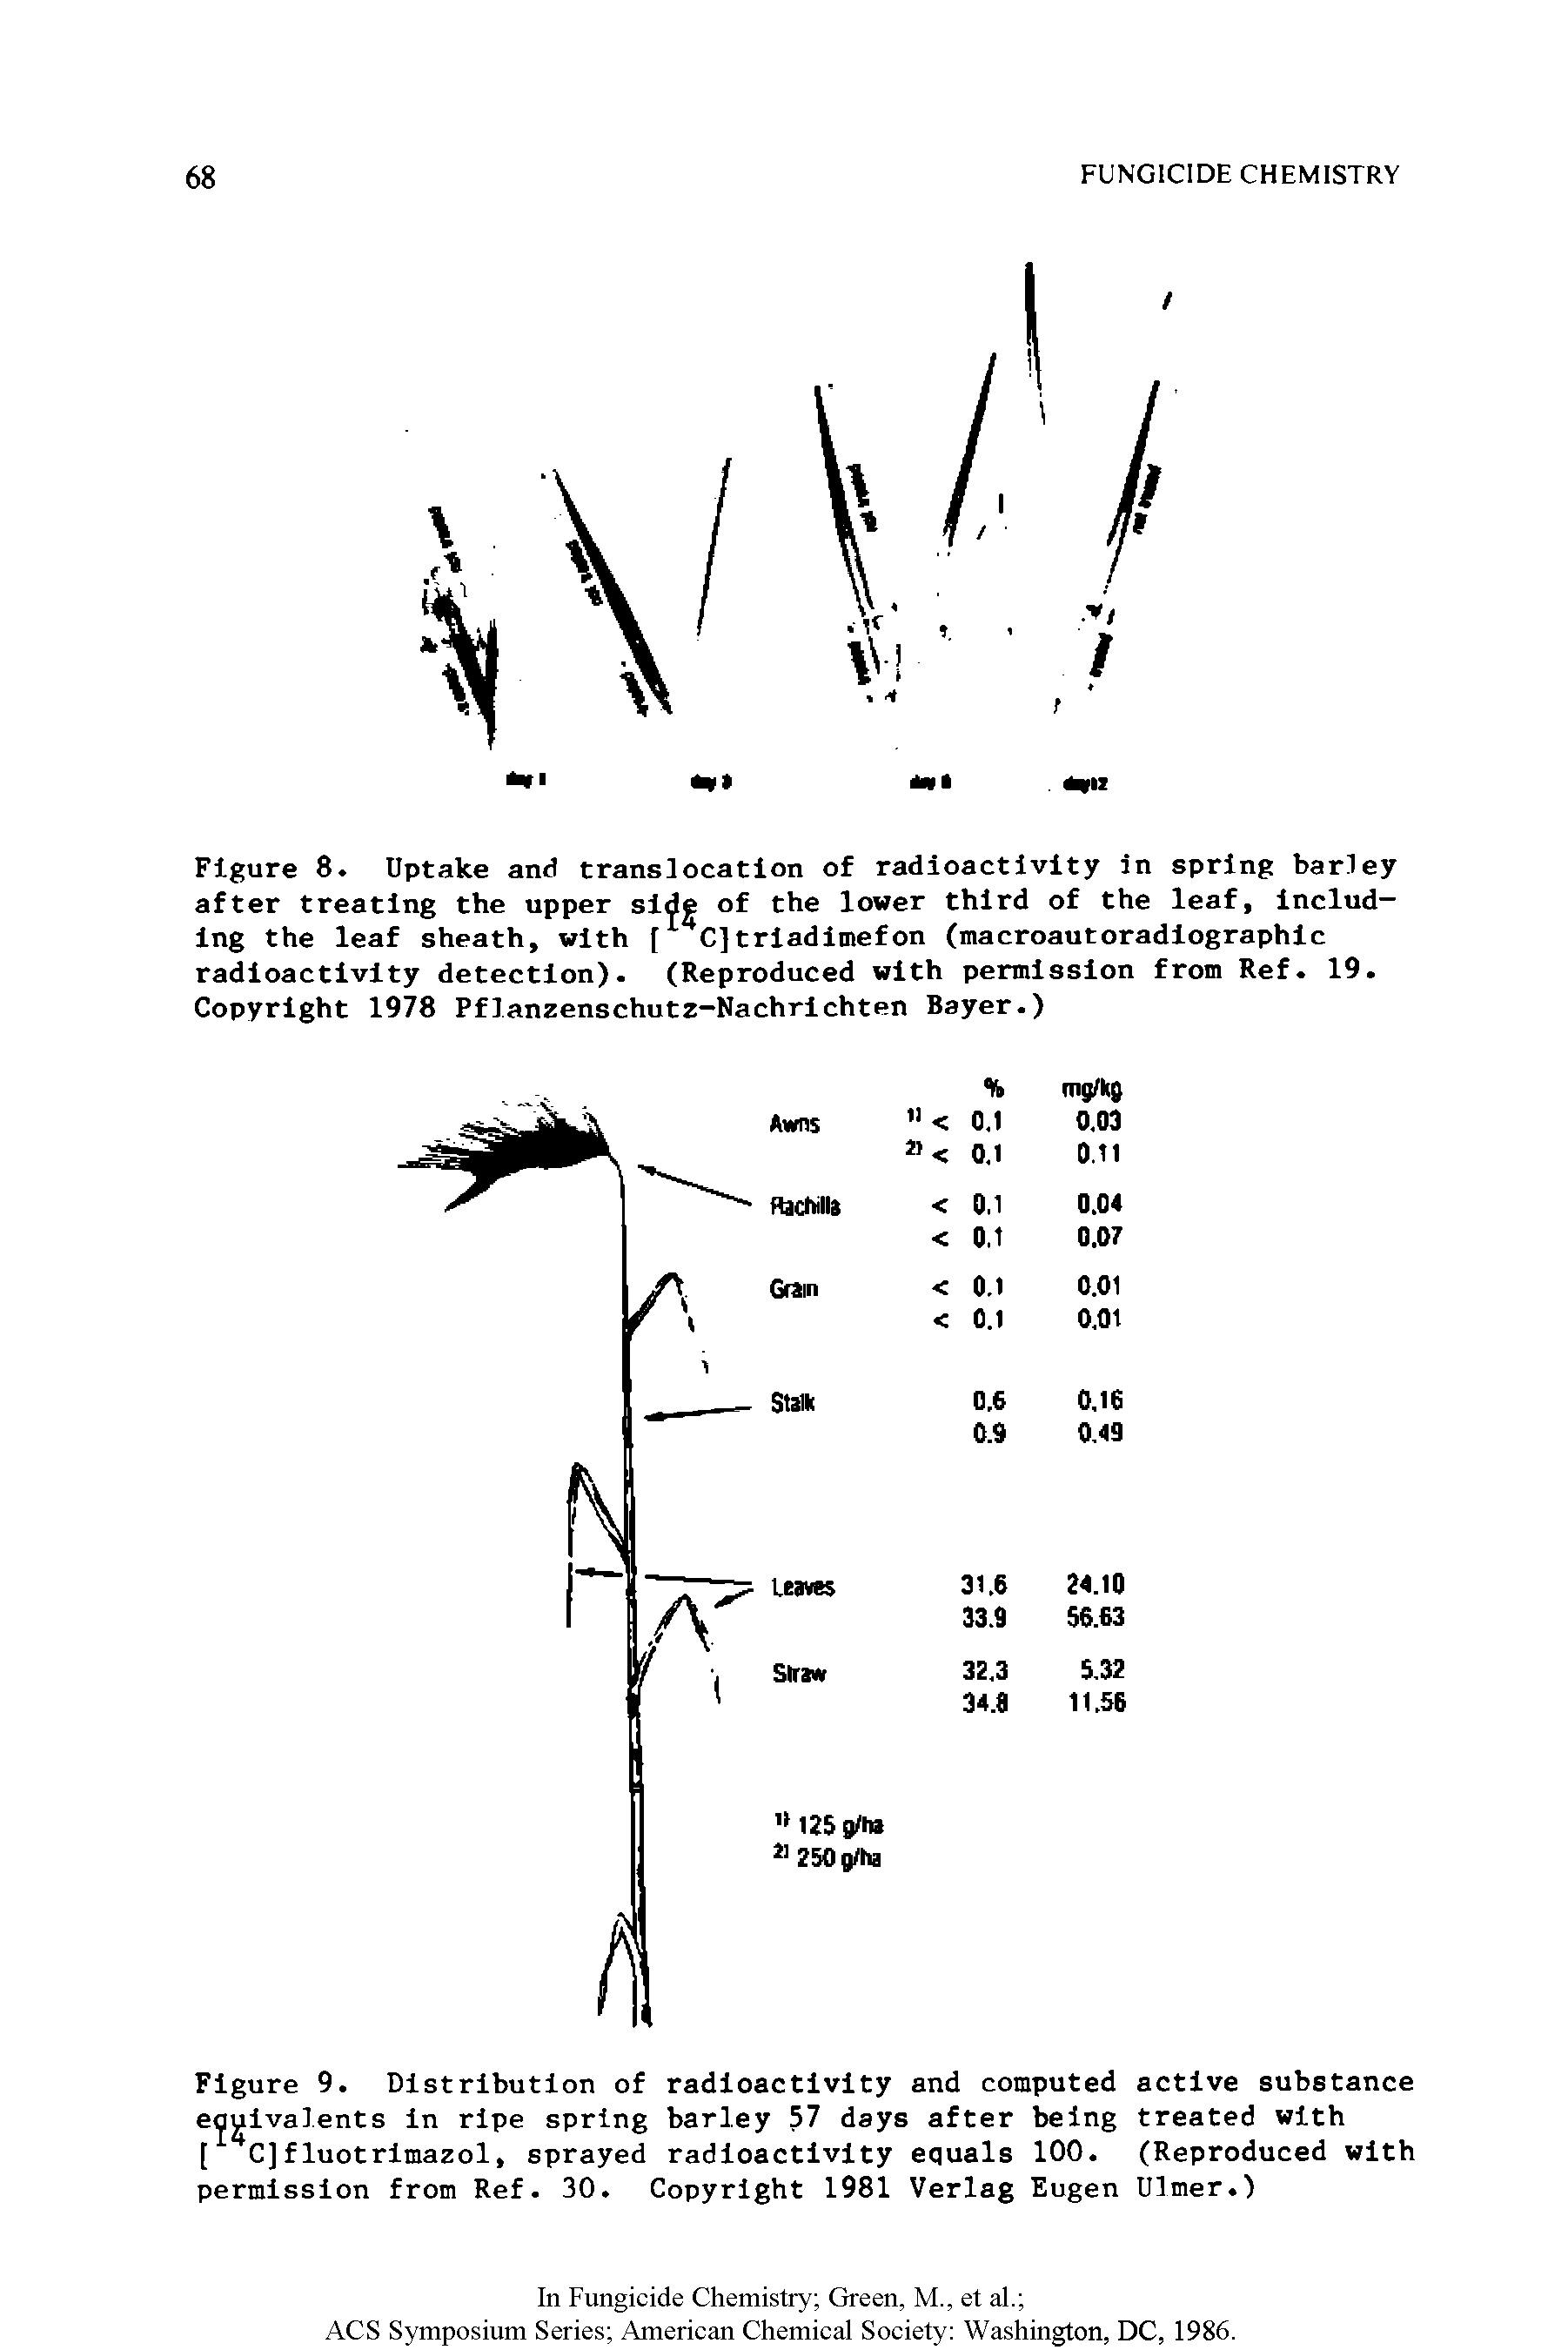 Figure 8. Uptake and translocation of radioactivity in spring barley after treating the upper side of the lower third of the leaf, including the leaf sheath, with [ 4C]triadimefon (macroautoradiographic radioactivity detection). (Reproduced with permission from Ref. 19. Copyright 1978 Pflanzenschutz-Nachrichten Bayer.)...